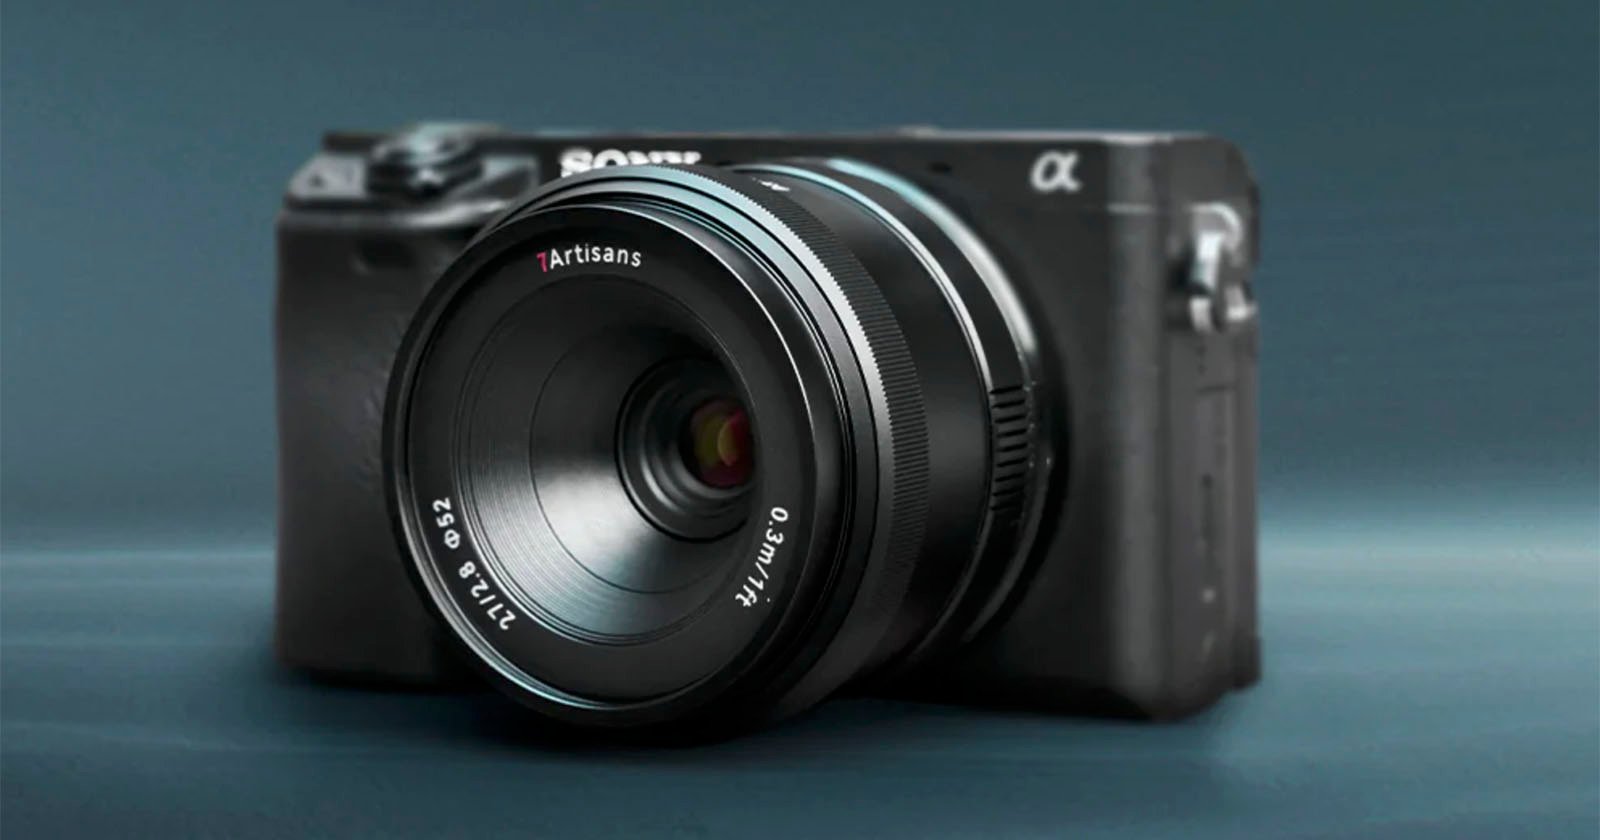 7Artisans Launches $129 27mm f/2.8 Prime for Sony APS-C Cameras